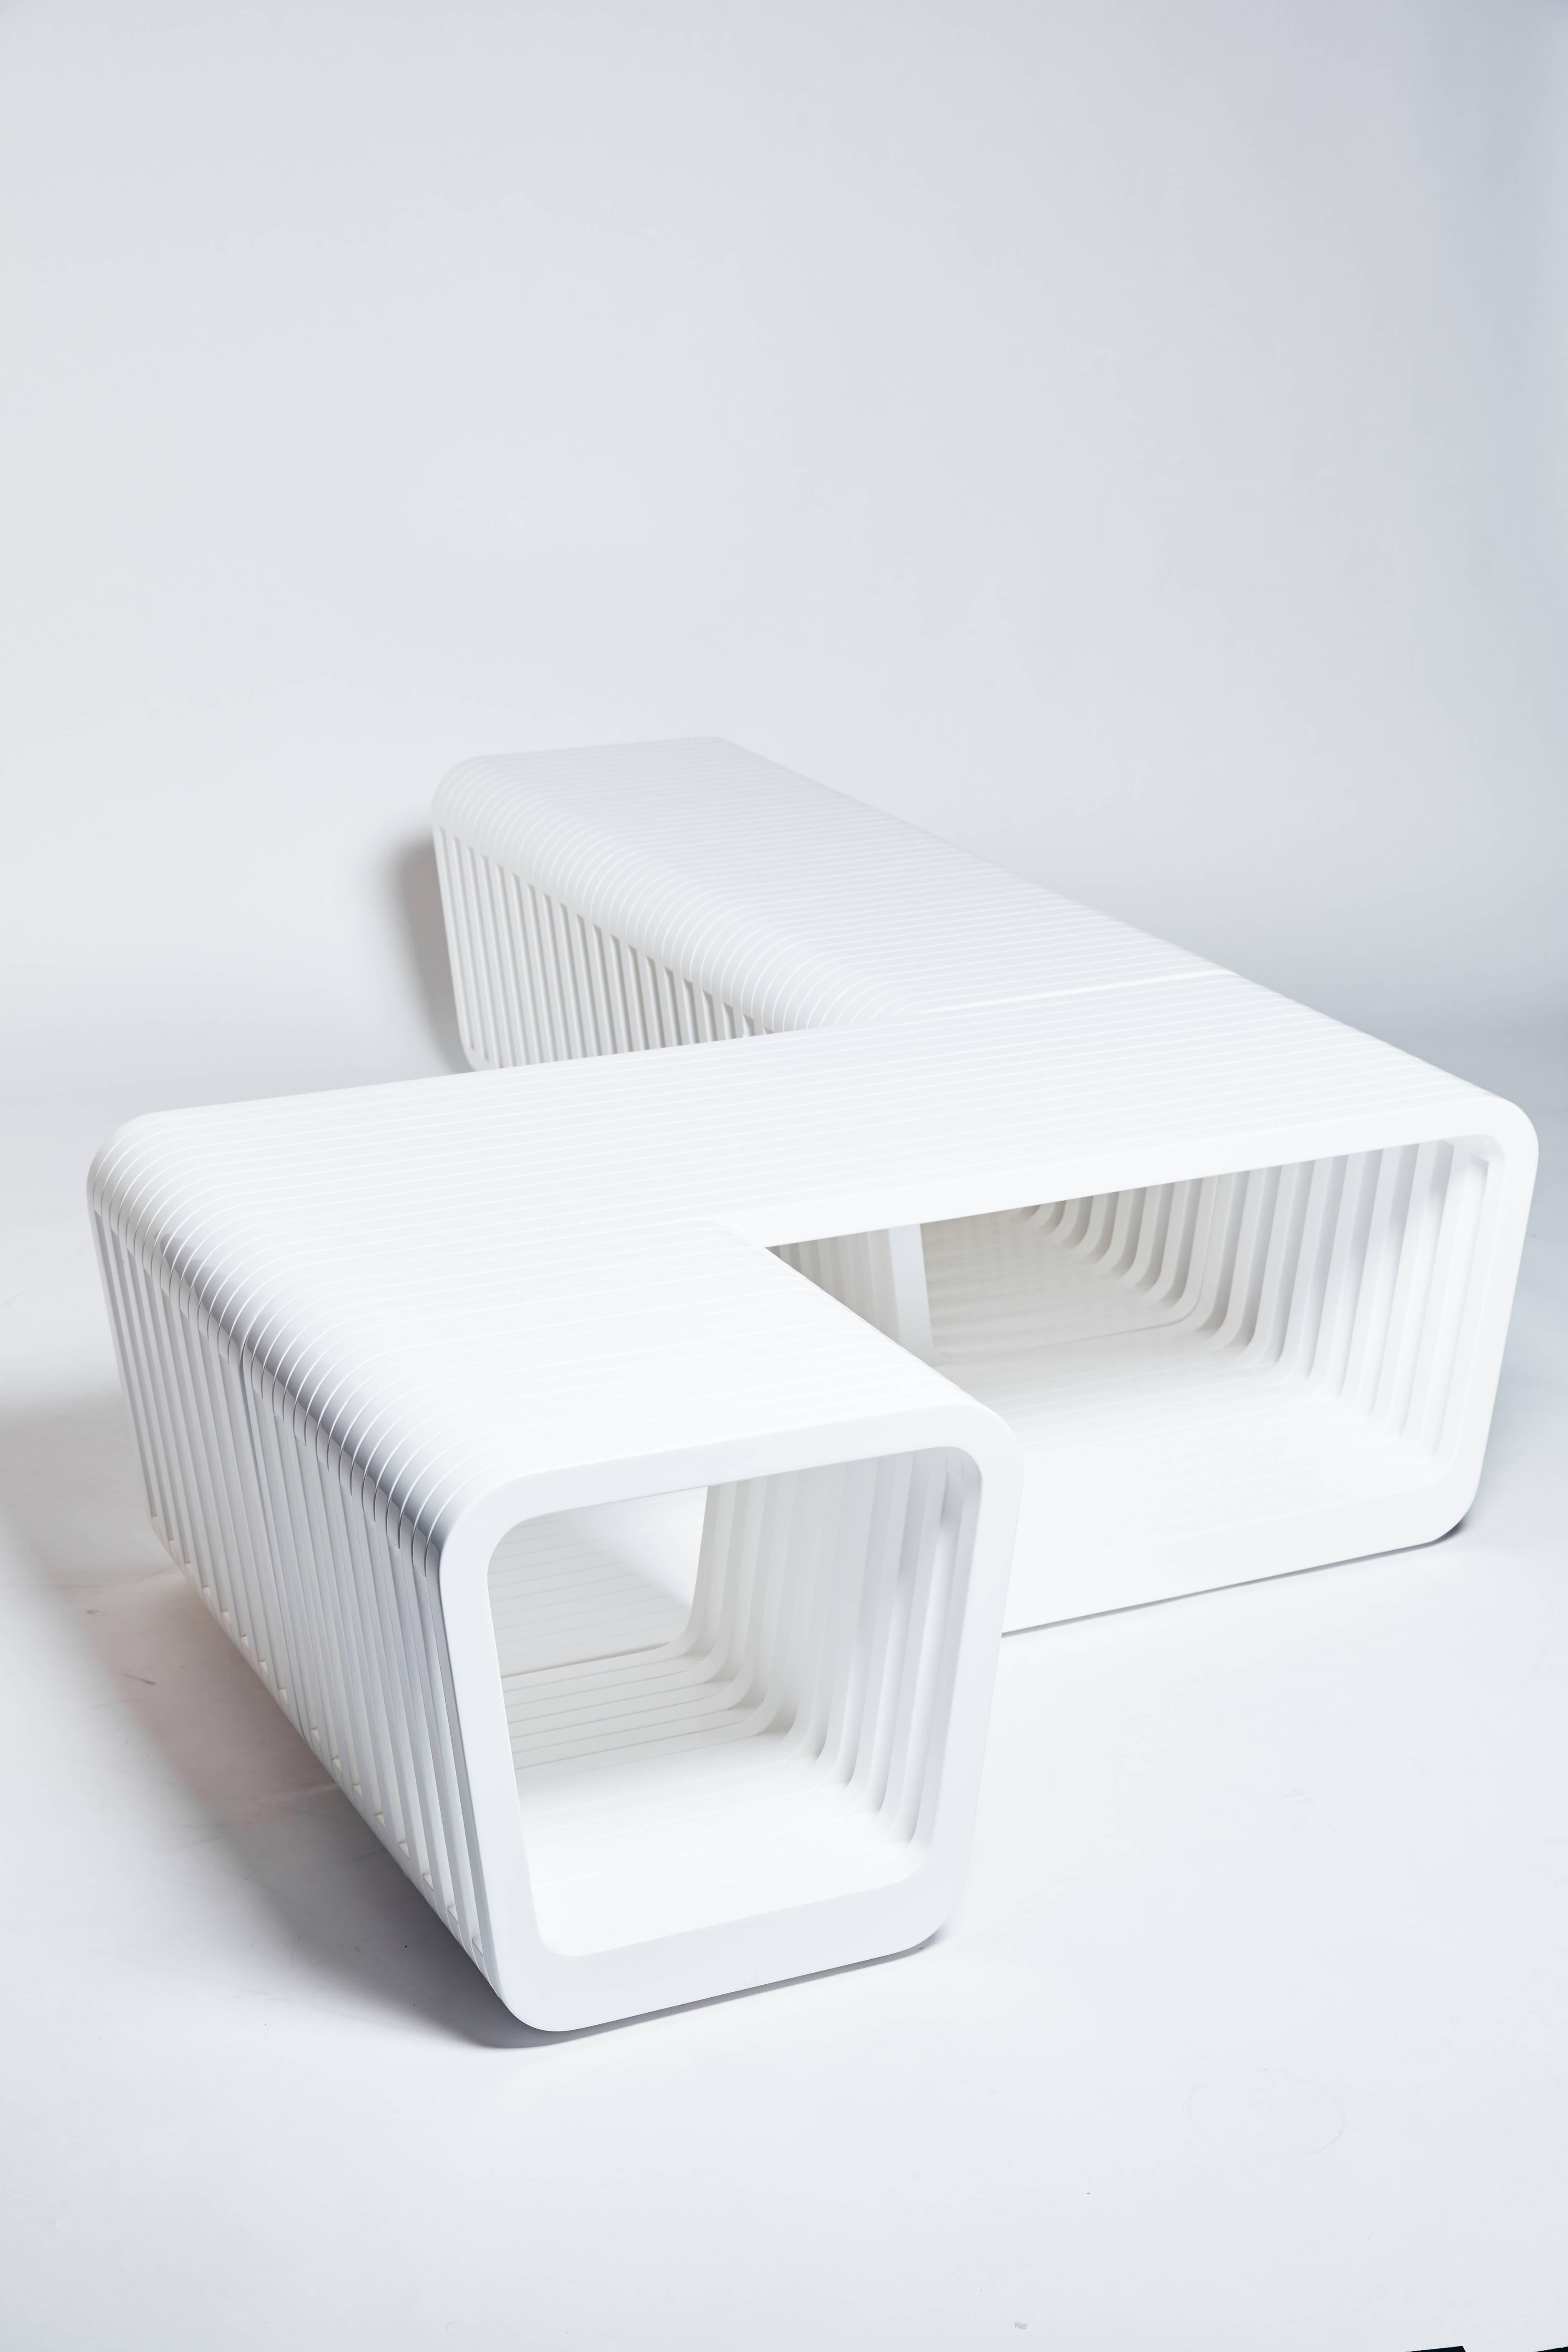 Bench or Coffee Table, LINK by Reda Amalou, 2016, White Lacquer For Sale 1